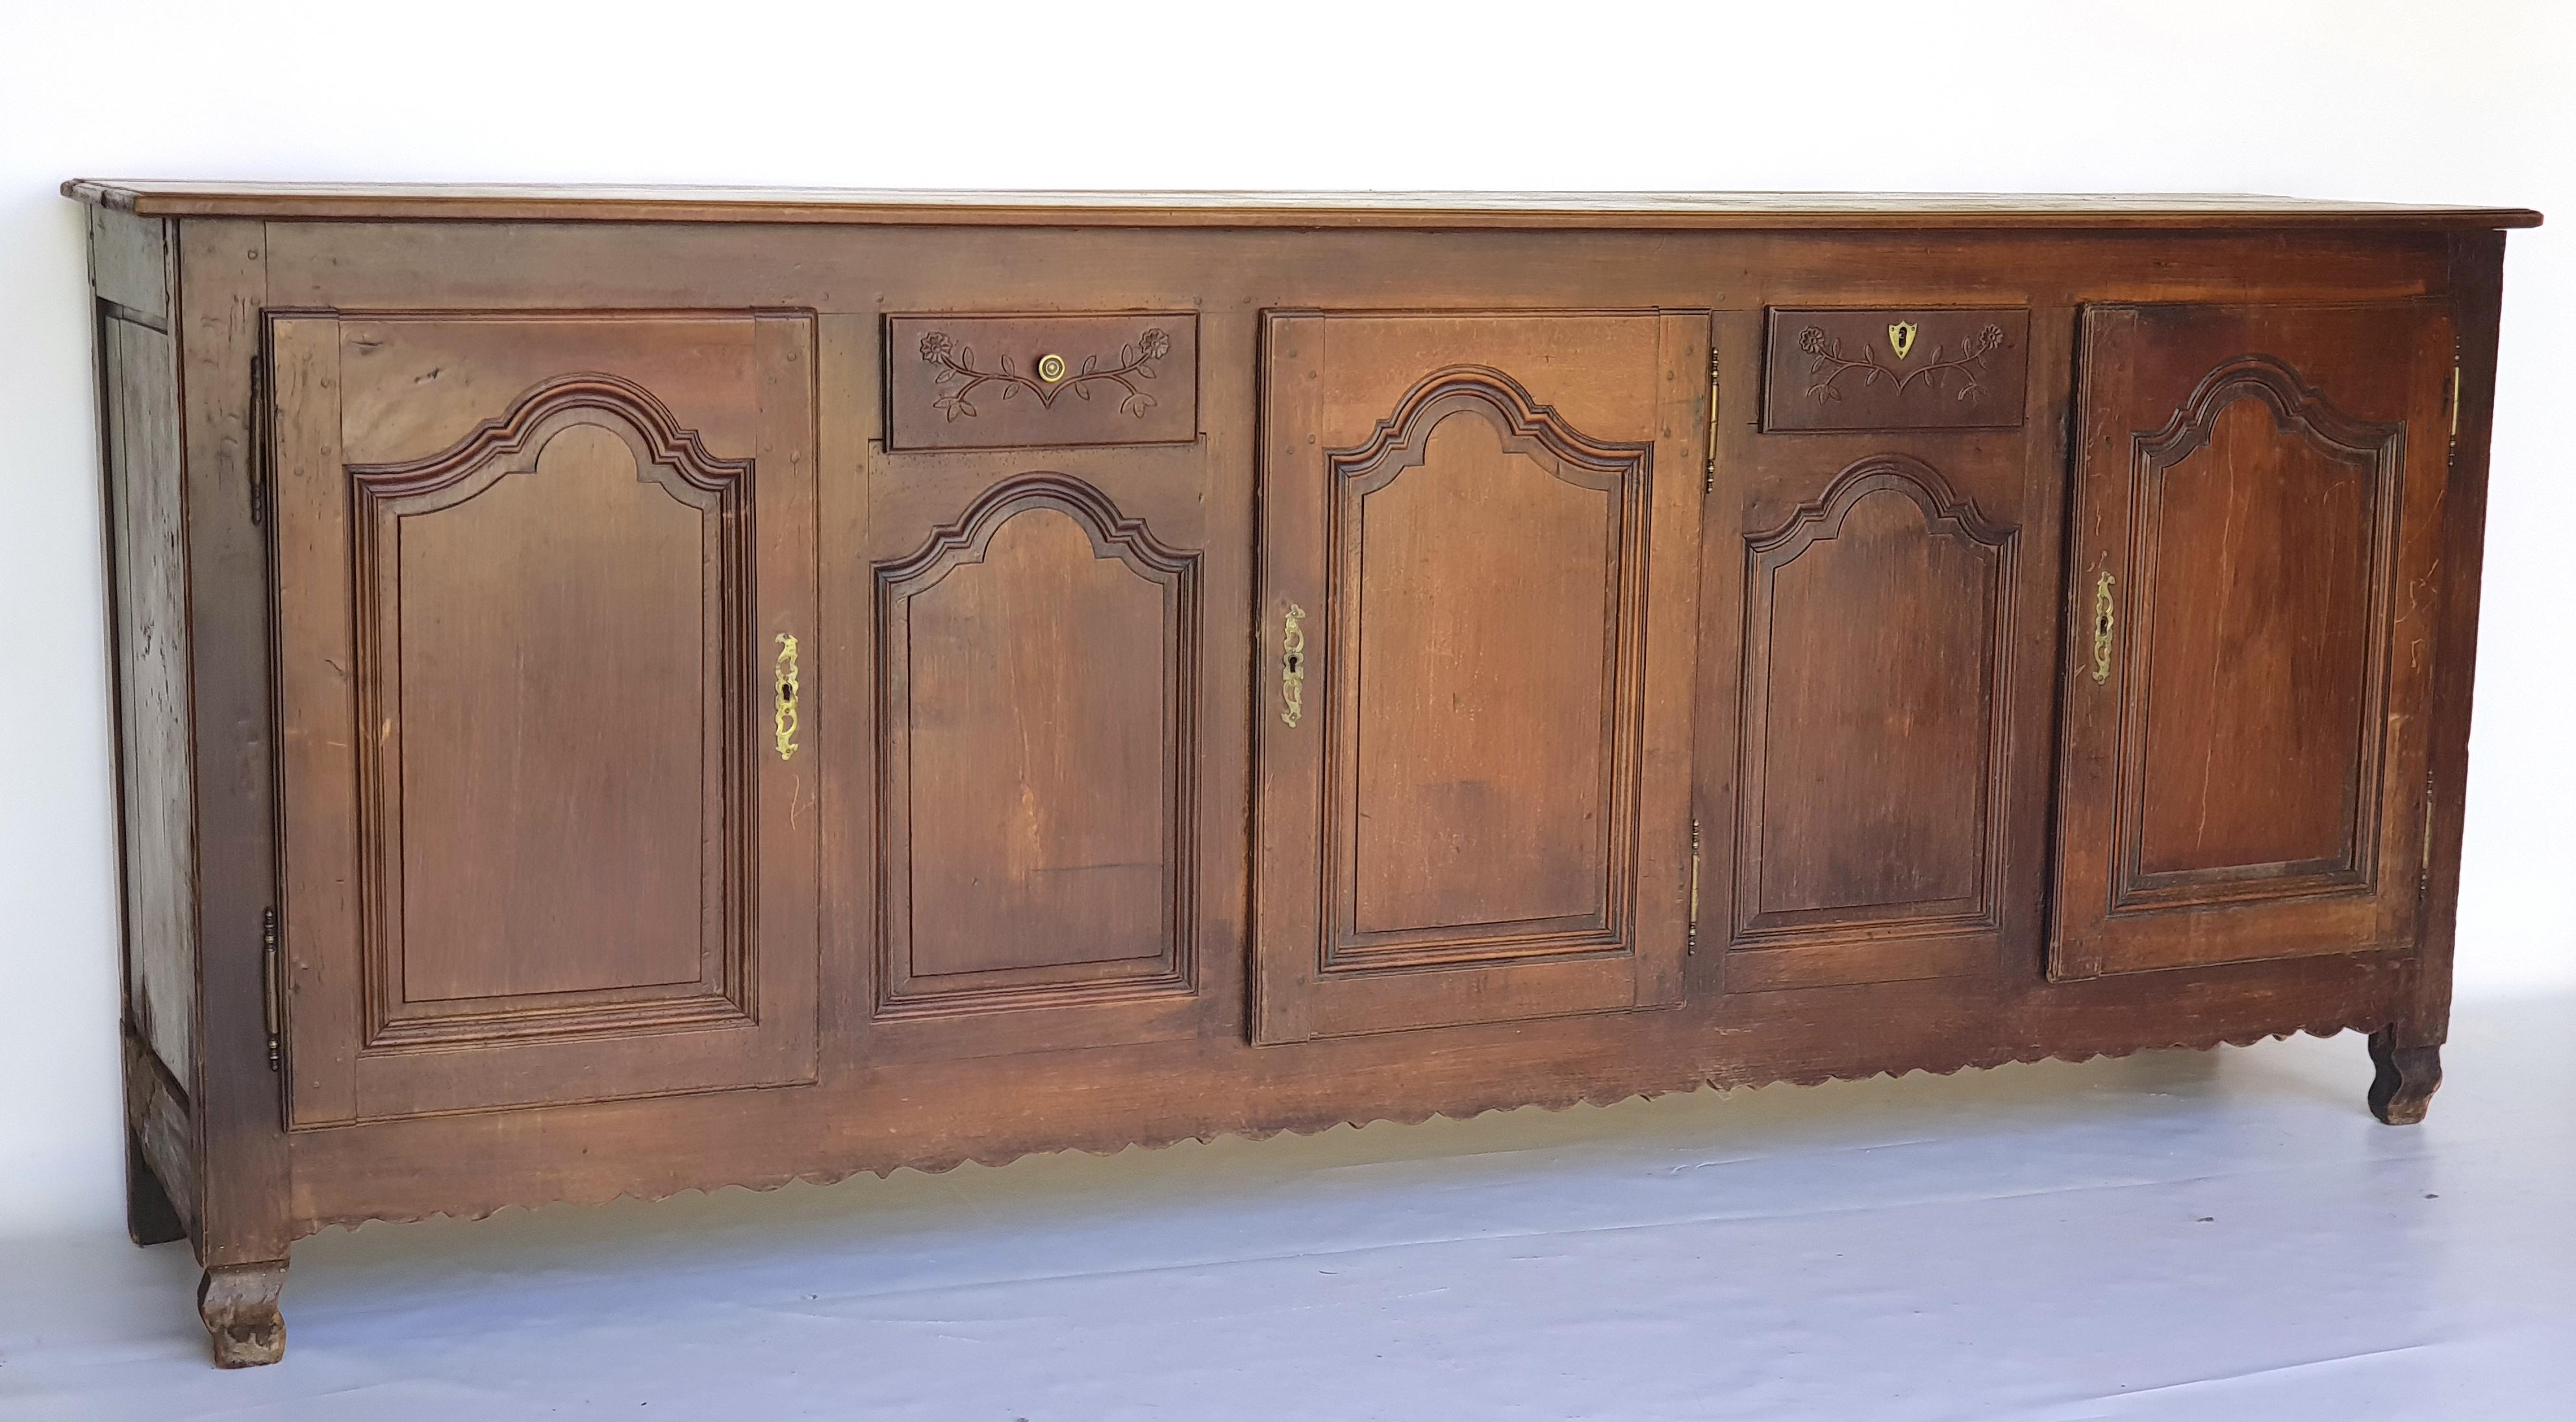 Baroque Sideboard, Provence, France, 1780s. Made of walnut.

Laterally flared, curved legs. Frame cut out. Three panelled and profiled doors, in between a drawer with a fine floral ornament in bas-relief. Top made of wood. All locks and fittings